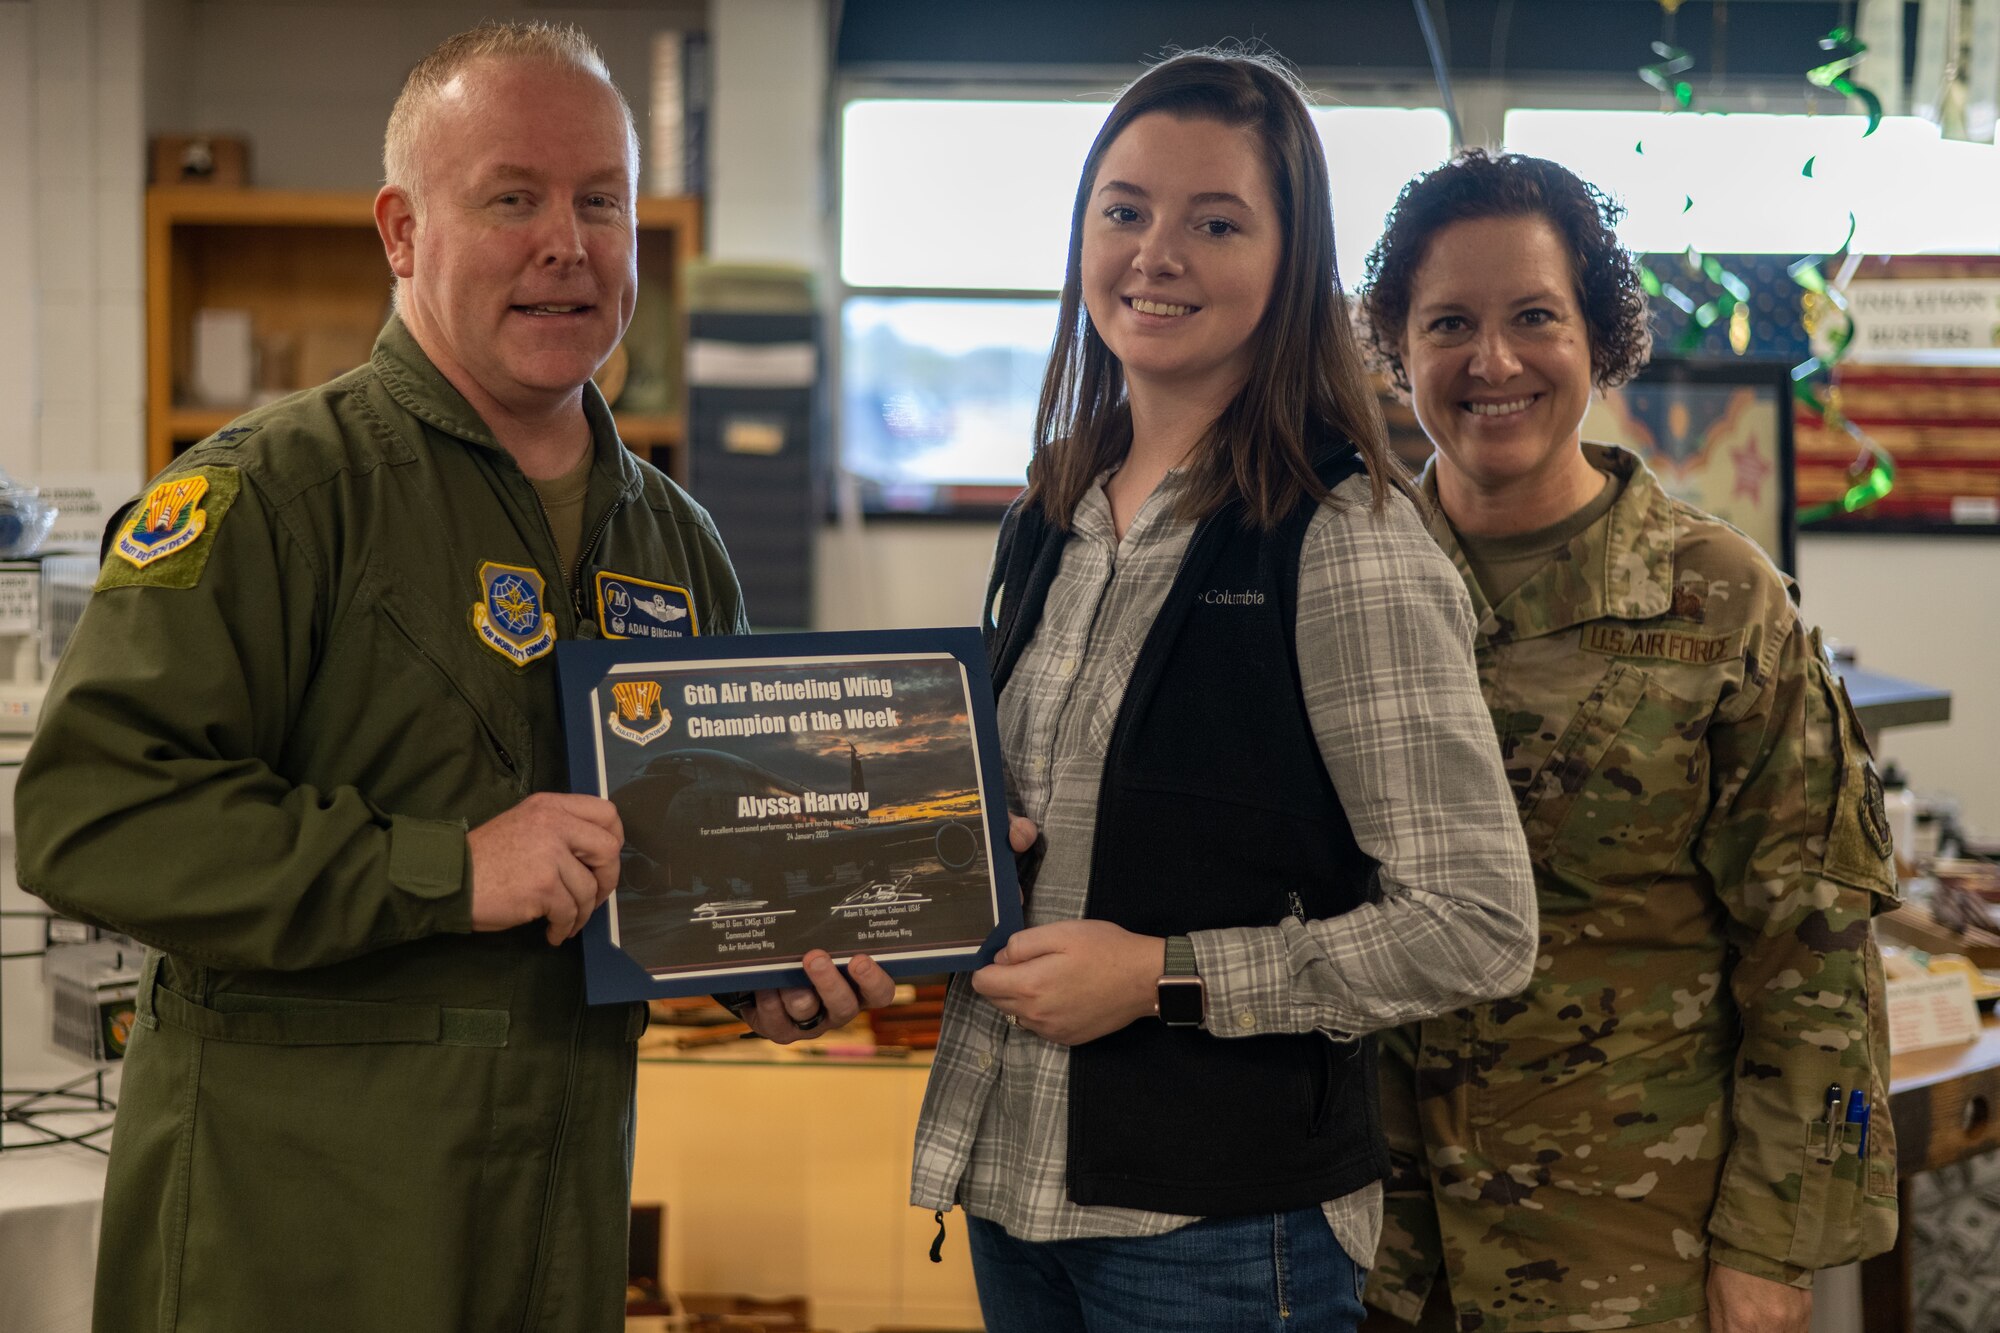 Harvey and her coworkers carried out a short-notice order during the holidays for a U.S. Special Operations command departing member. The hard work and dedication earned her the Champ of the Week recognition alongside two of her coworkers. (U.S. Air Force photo by Airman 1st Class Zachary Foster)